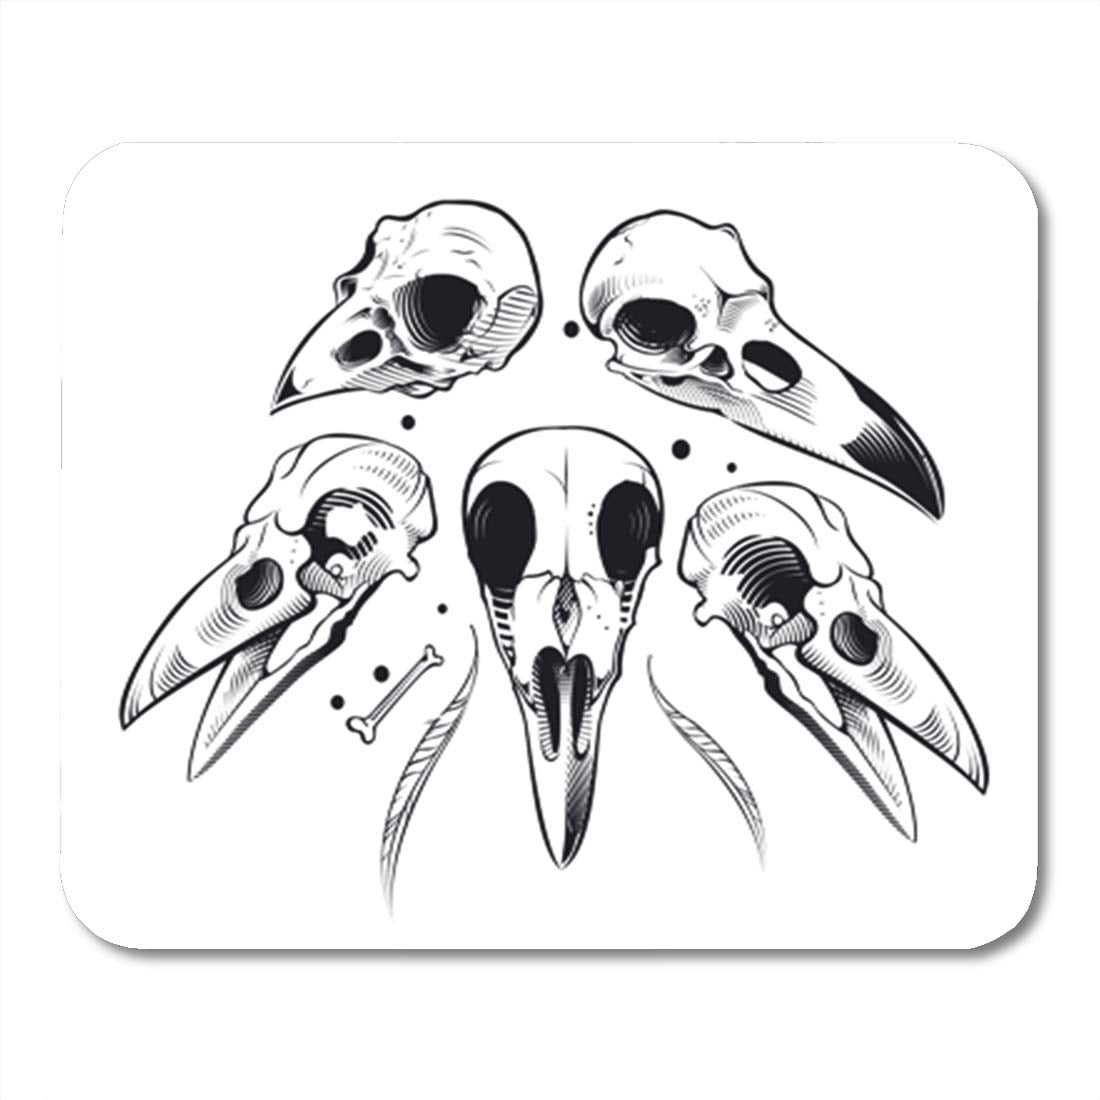 Share more than 68 crow on a skull tattoo latest - in.eteachers